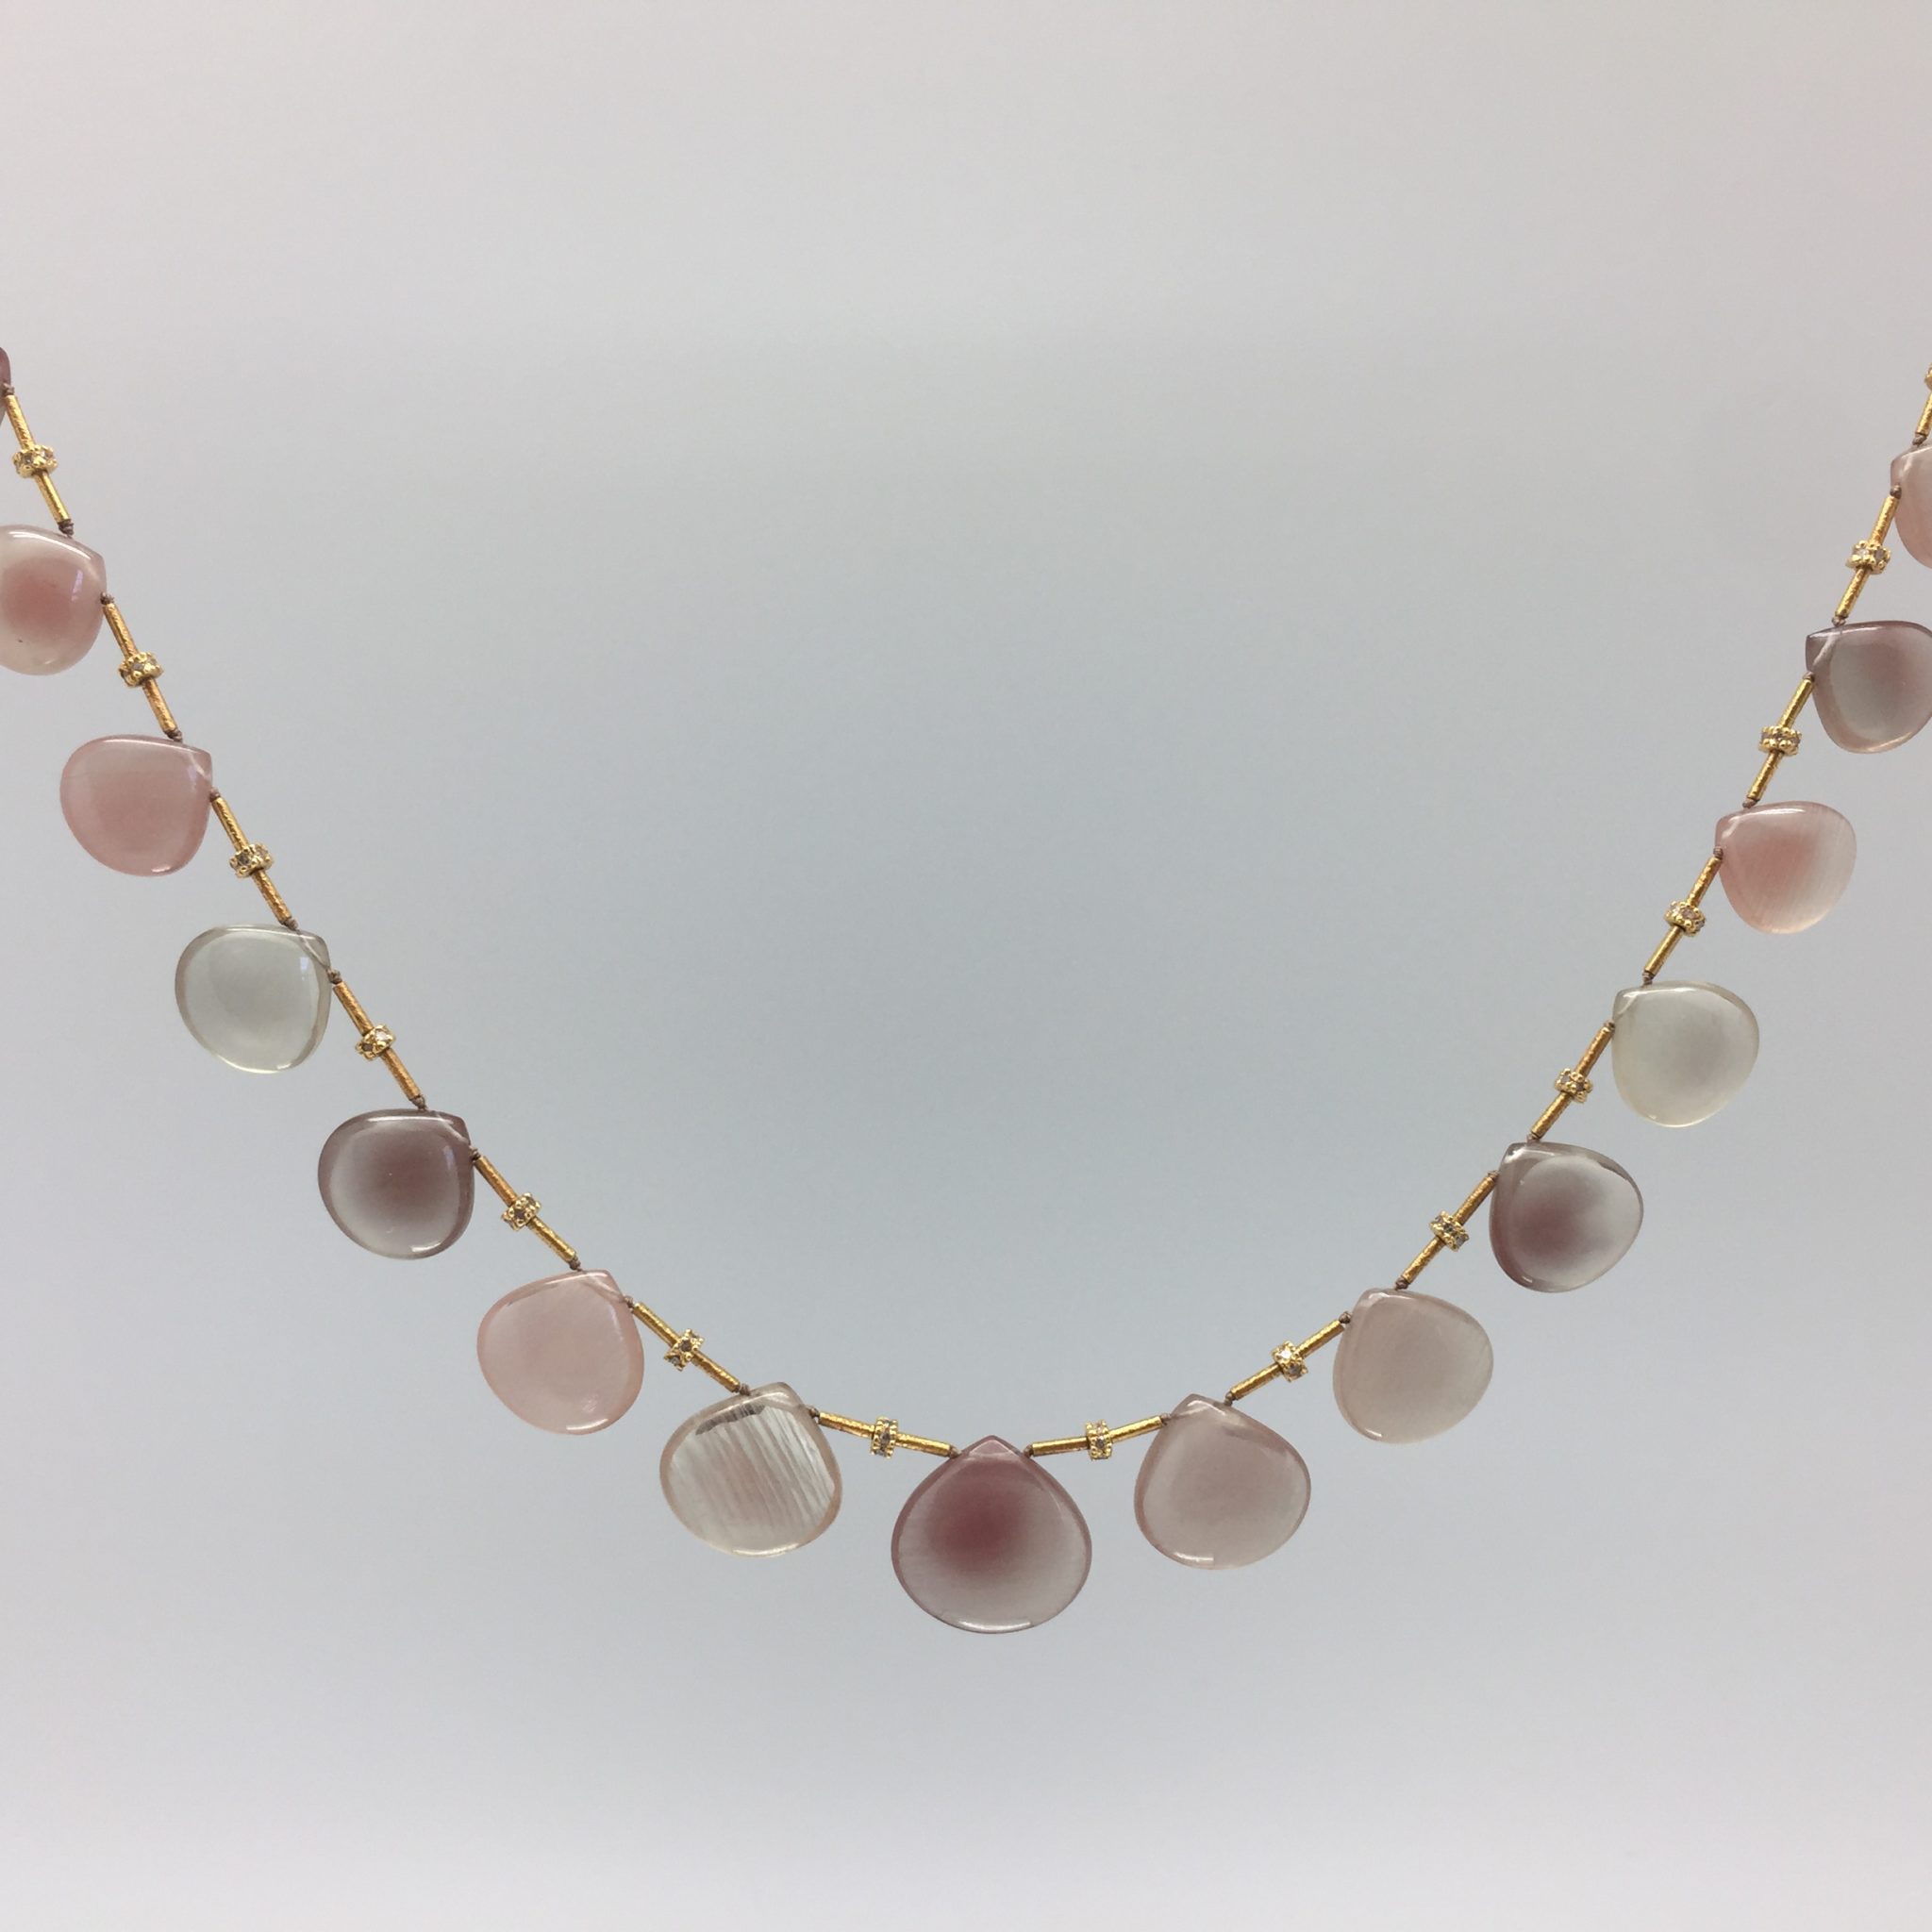 Daydreaming in Sunstones: Sunstone necklace of opaque smooth clam-shaped briolettes spaced with 18K gold tubes and 14K rondelle beads studded with diamonds. Item N00006 cover photo